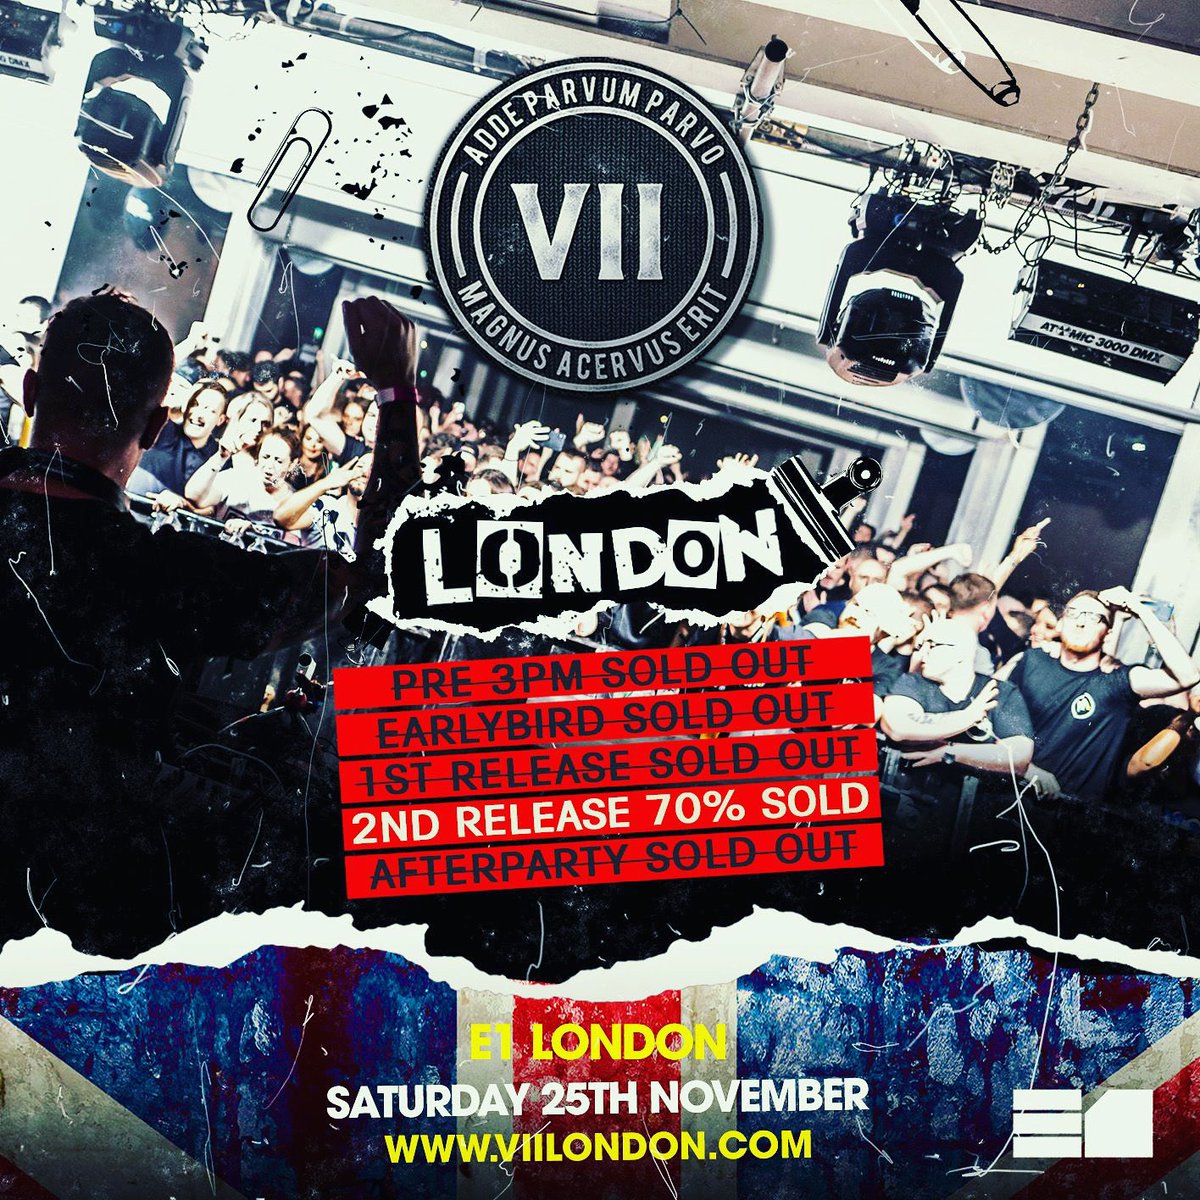 London Afterparty sold out. 🤘🏻@TheVIICrew